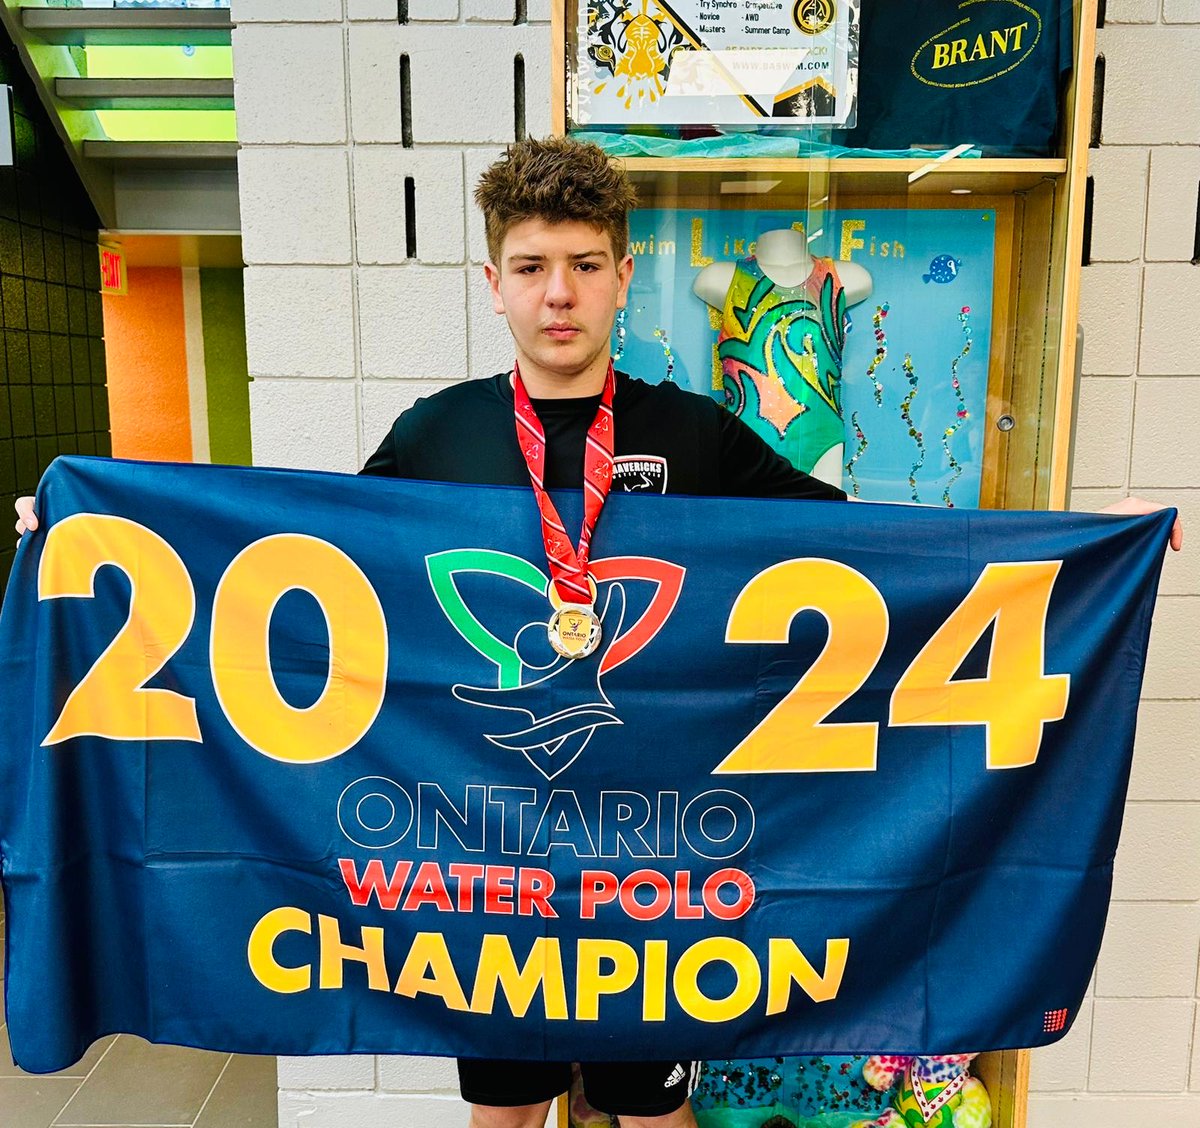 Congratulations to Matteo, a student here at MacLachlan College, for his remarkable victory at the Ontario Provincial Waterpolo Championship! 🥇 Matteo's unwavering dedication with his Toronto team led to an undefeated season throughout 2023-2024. #StudentAchievement